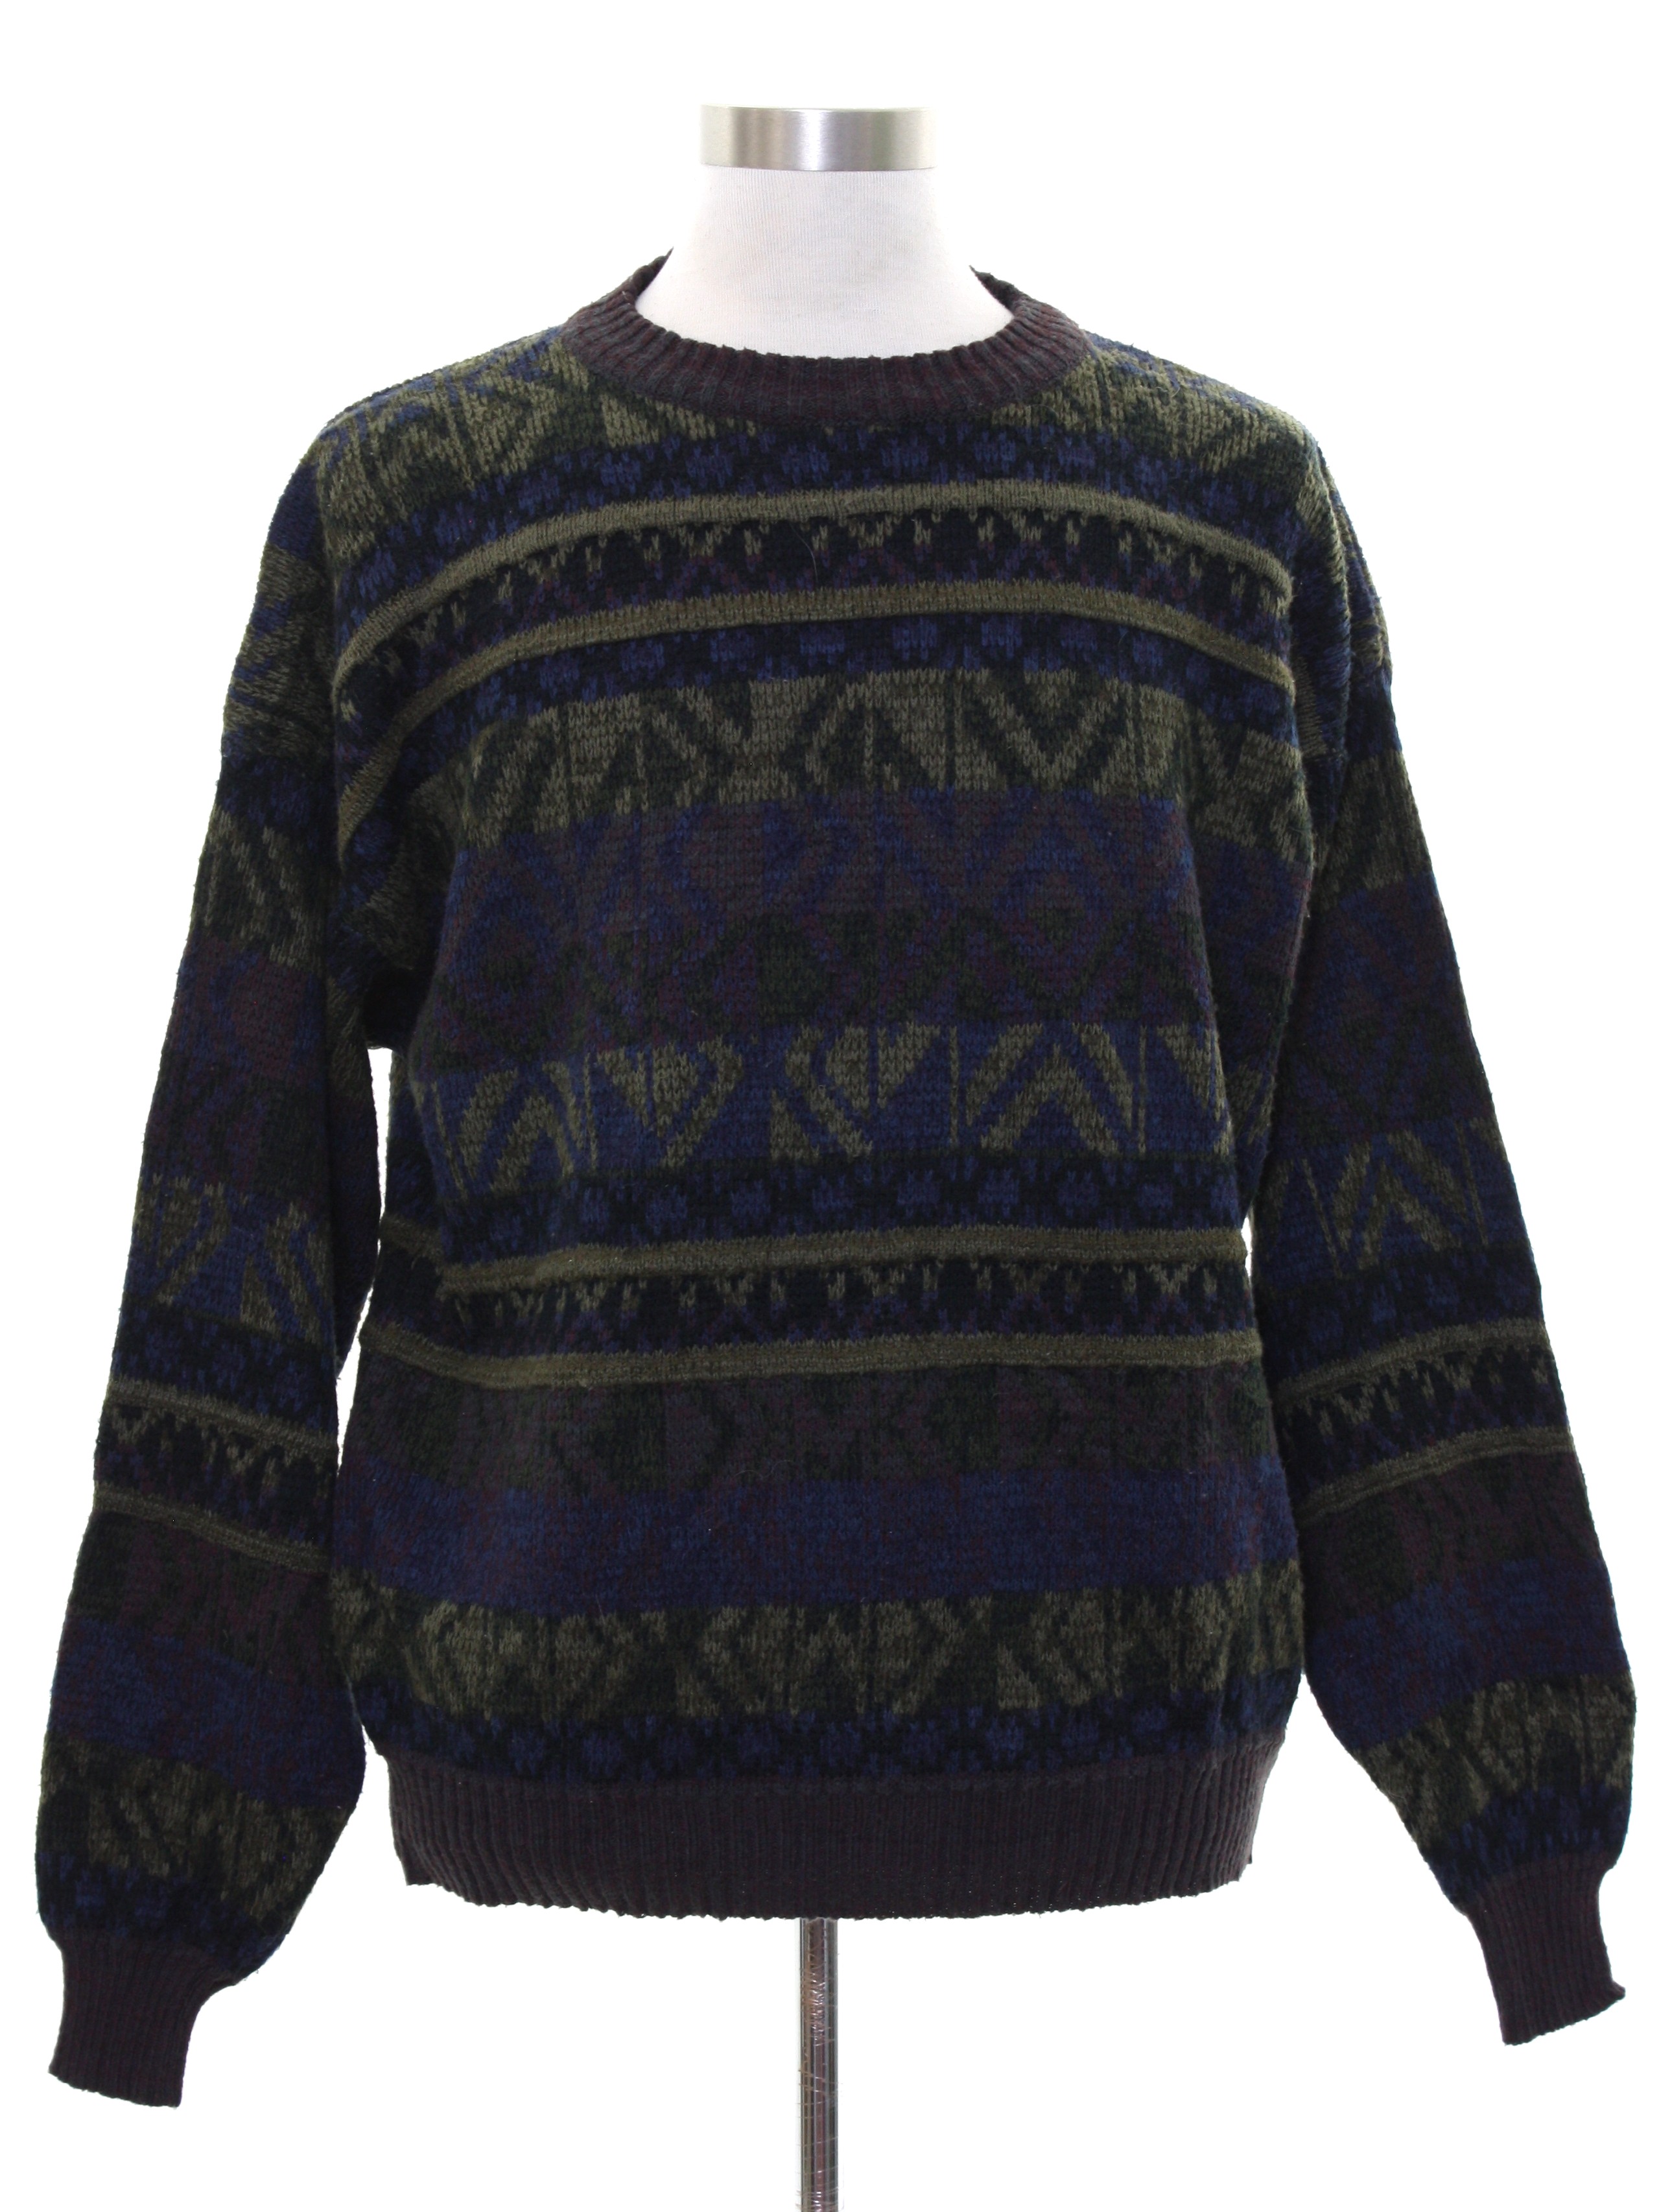 80's Vintage Sweater: 80s -The Mens Store at Sears- Mens multicolored ...